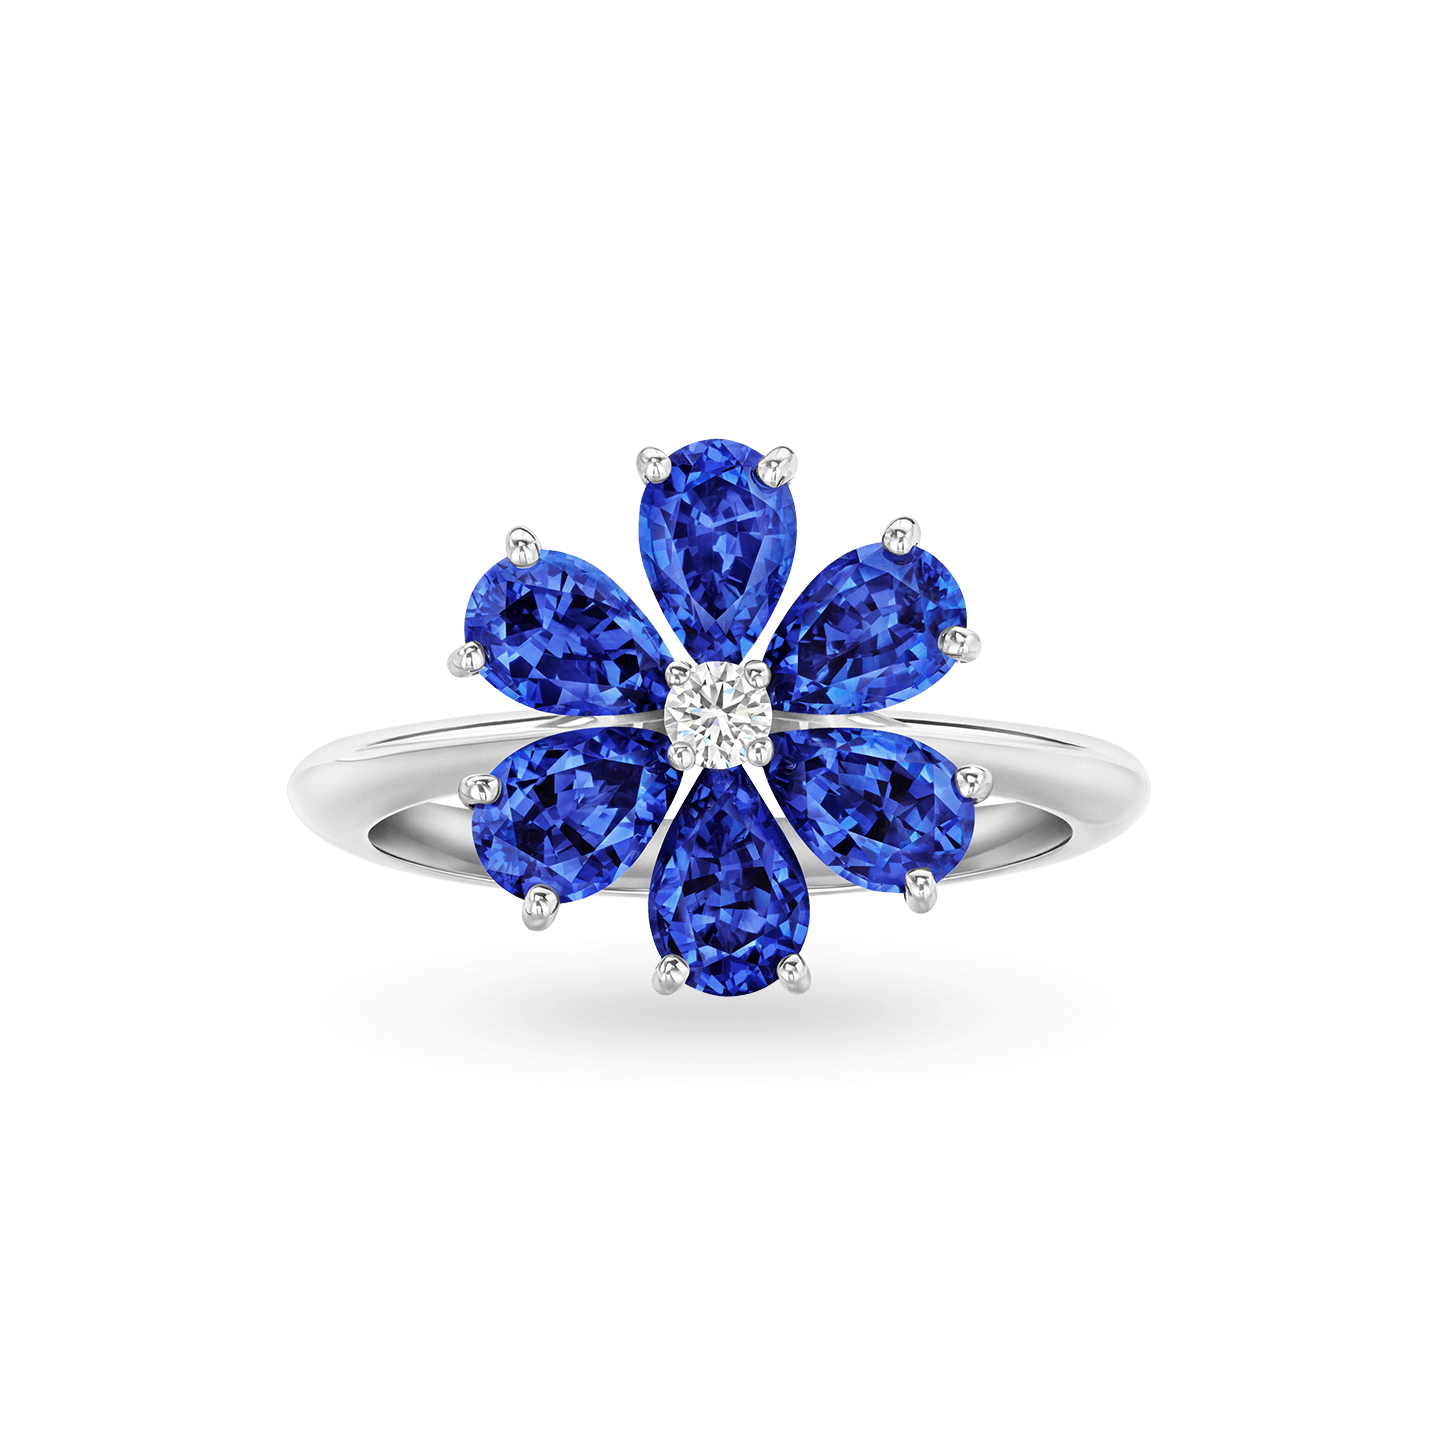 Forget-Me-Not Sapphire and Diamond Ring, Product Image 1